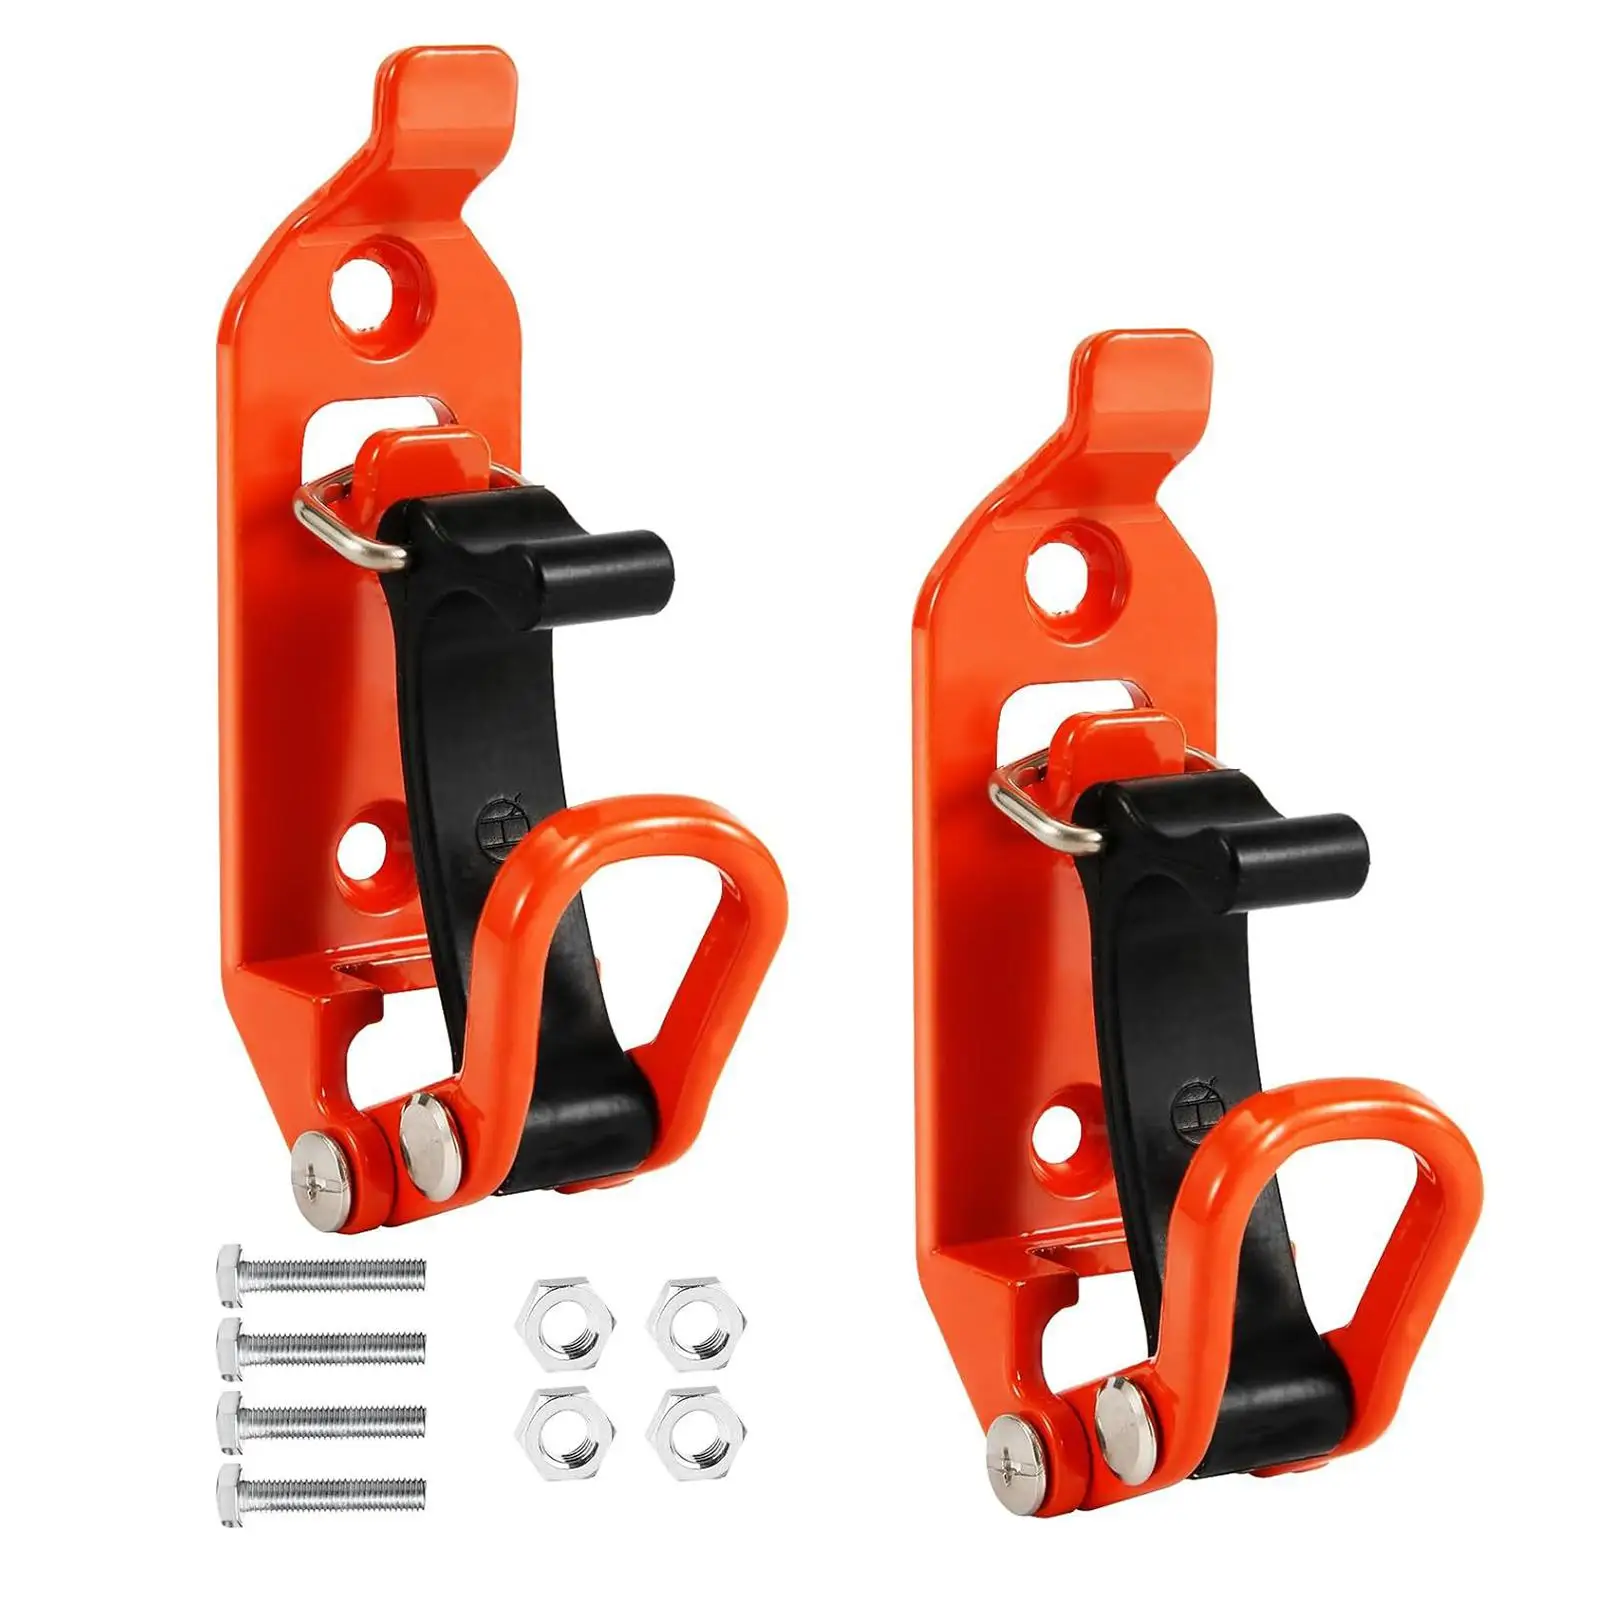 2x Shovel Mount for Roof Rack Lightweight Car Accessories Durable Wear Resistant Quick Release Hammer Holder Axe Holder Clamp